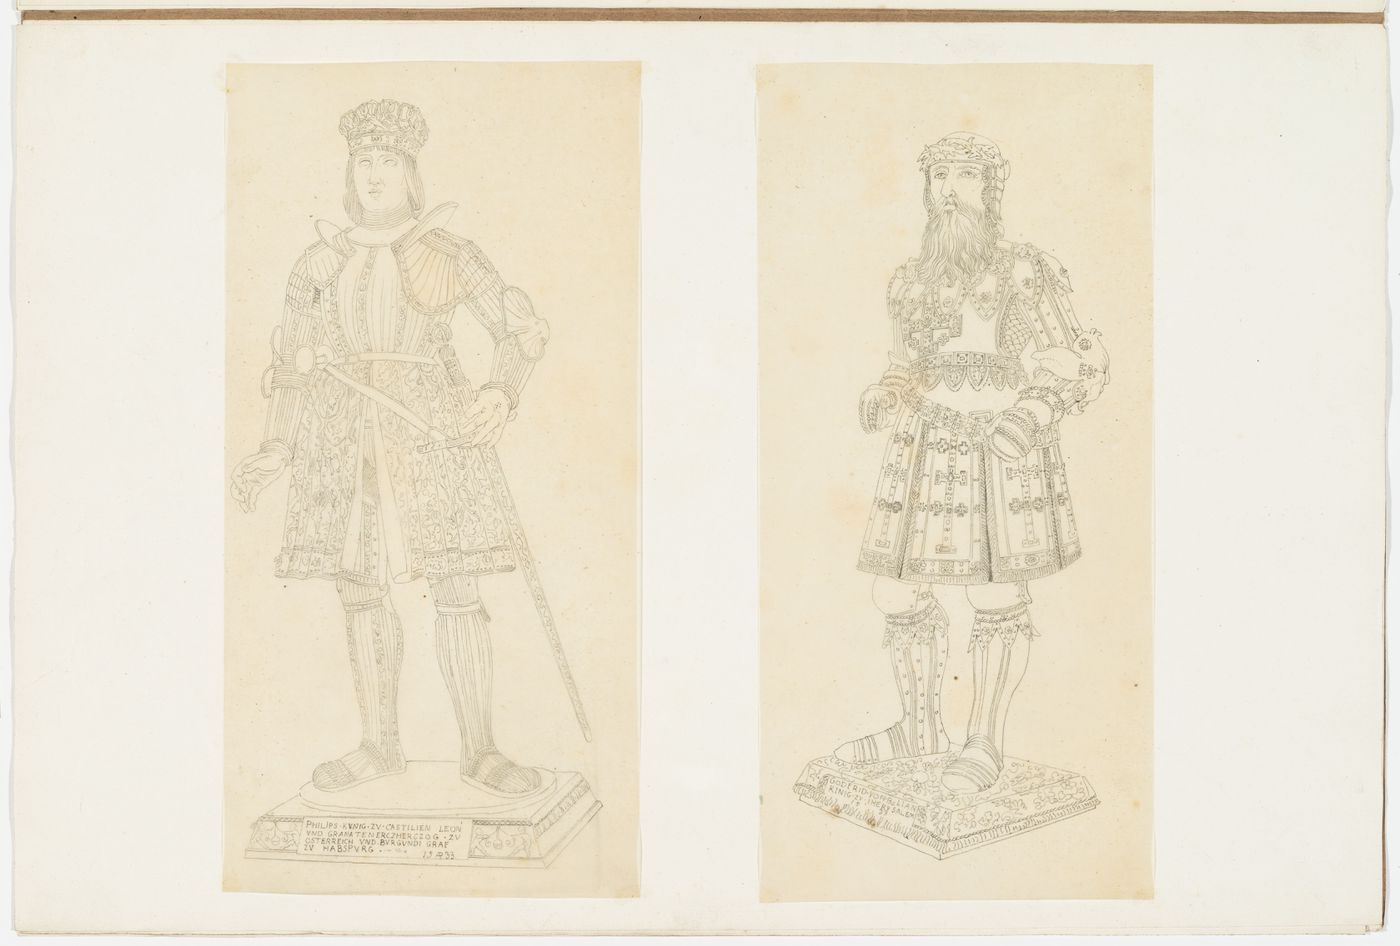 Drawings of statues of Philip I, King of Castille and son of Maximilian I, and Godfrey of Bouillon, King of Jerusalem, from the cenotaph of Maximilian I in the Hofkirche, Innsbruck